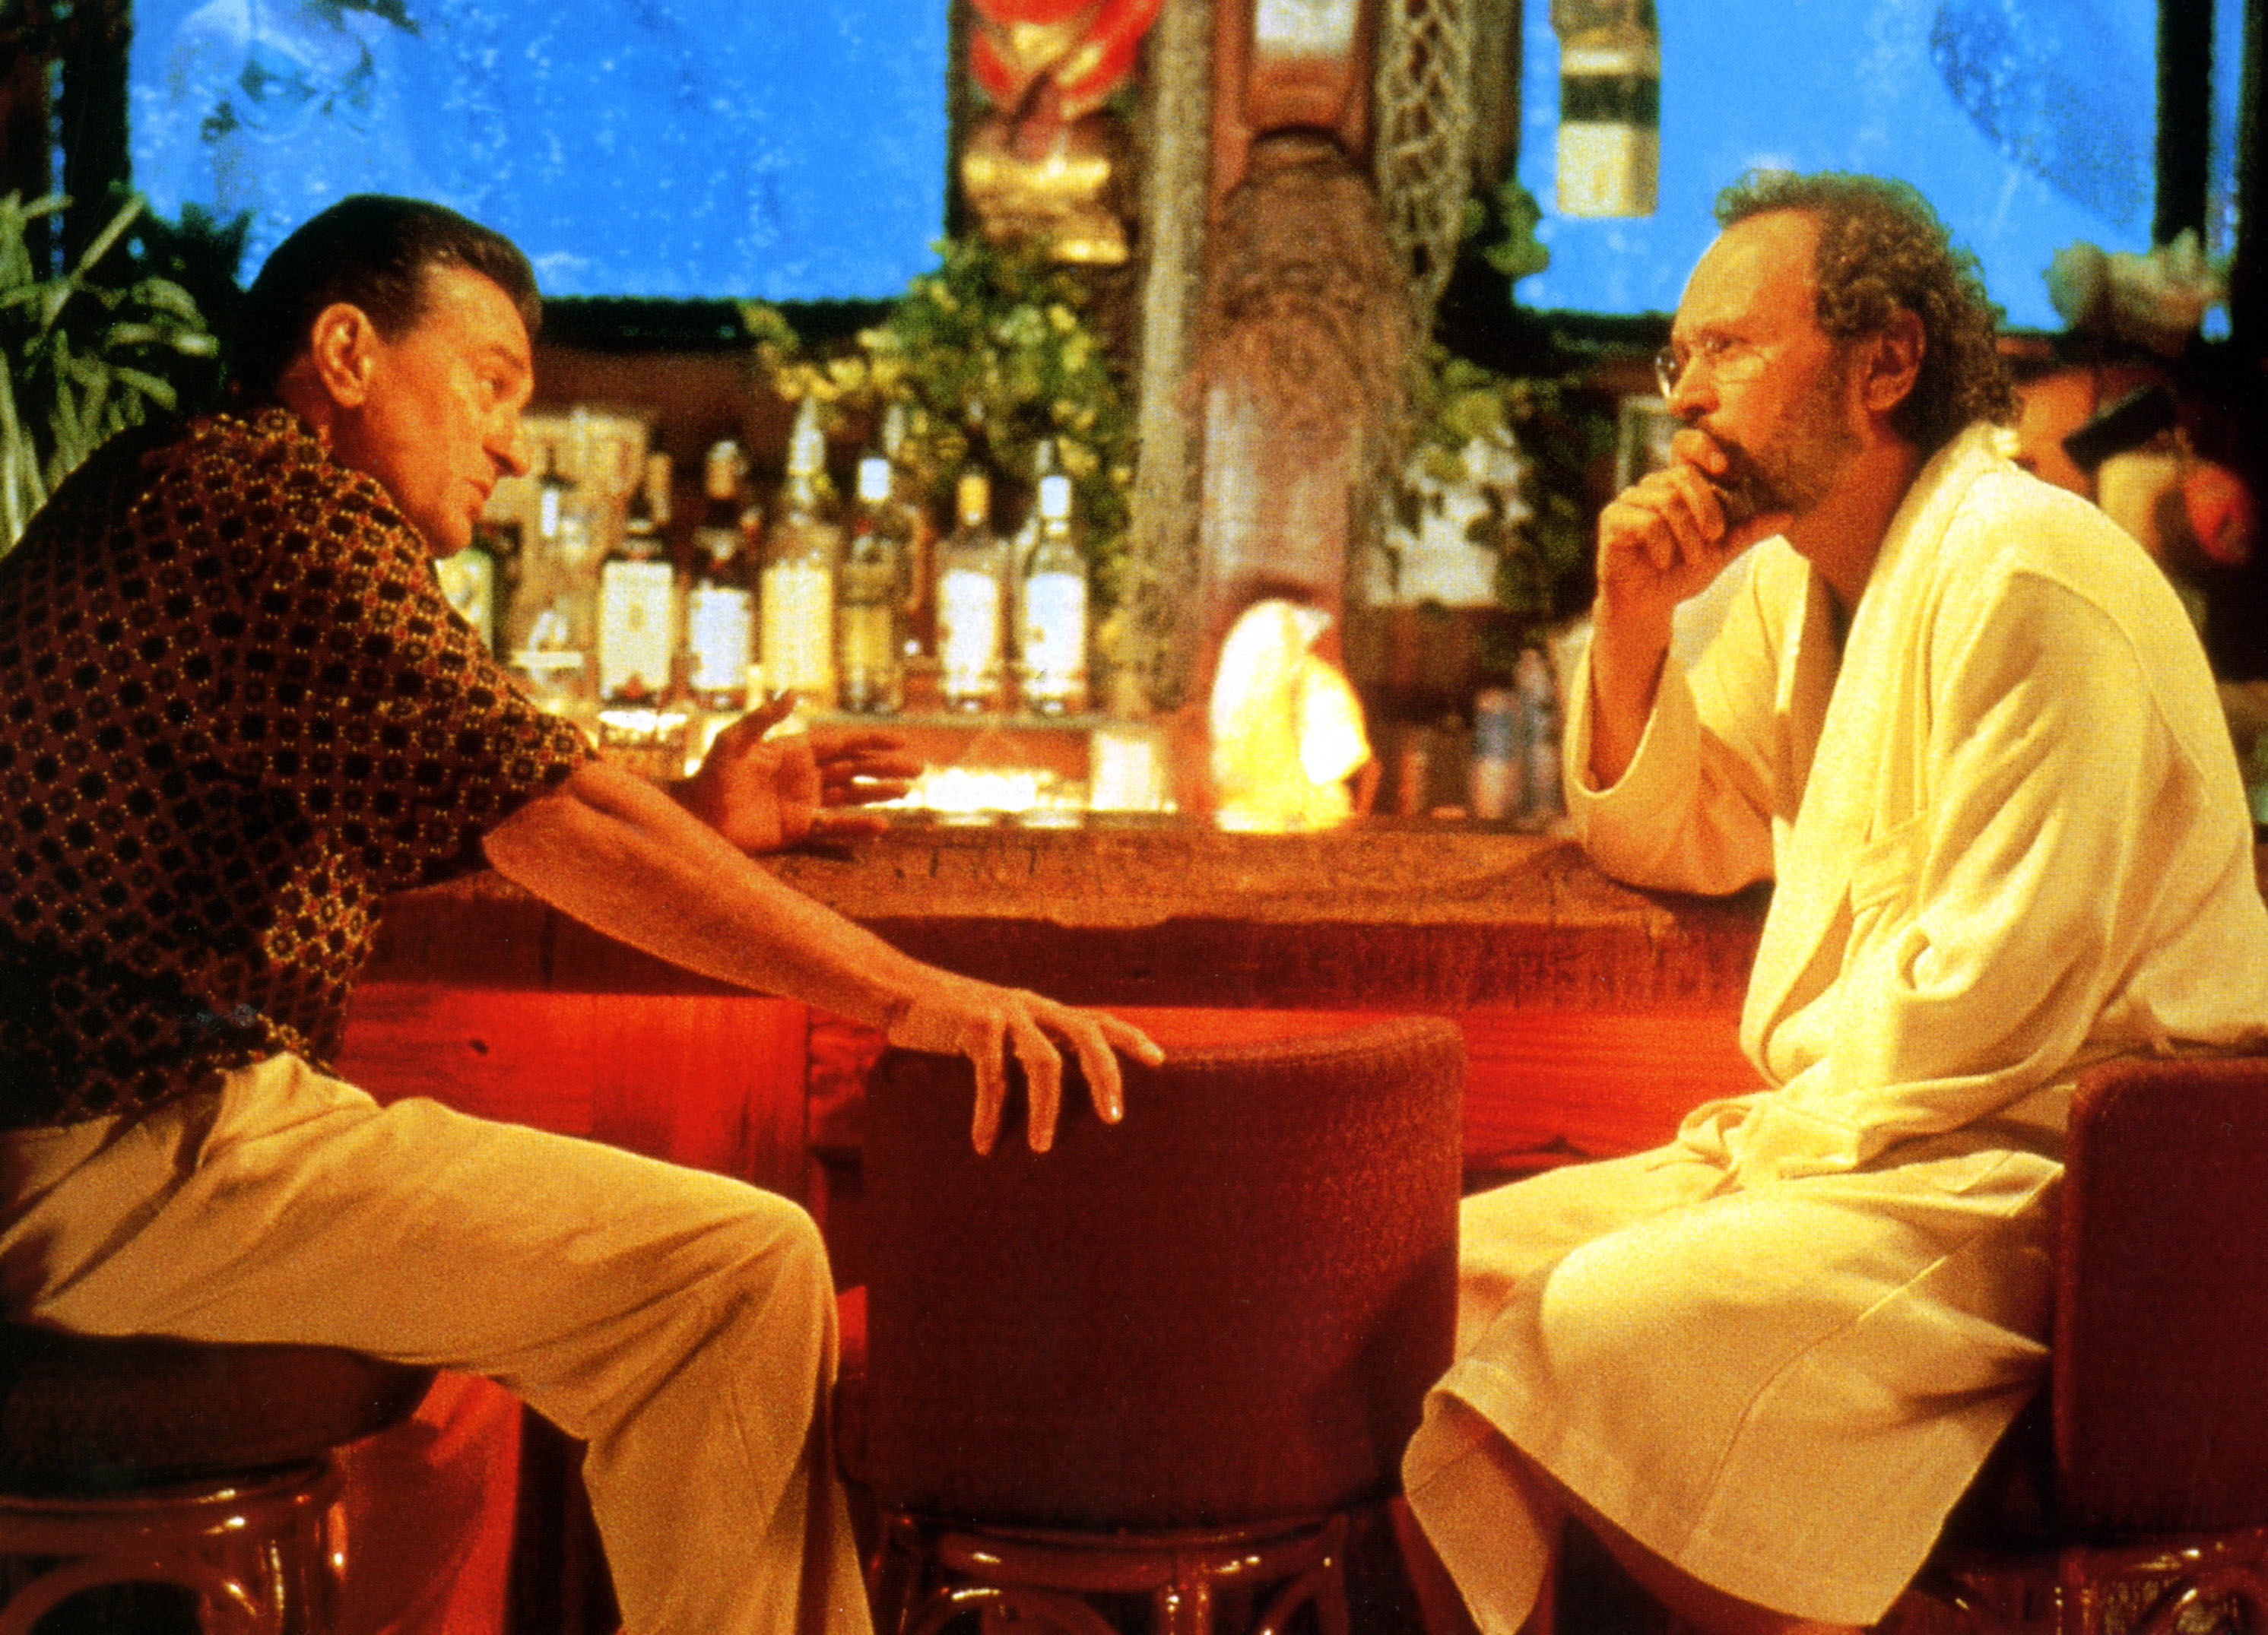 A man in a ornate shirt and khakis sits with a therapist in a long robe